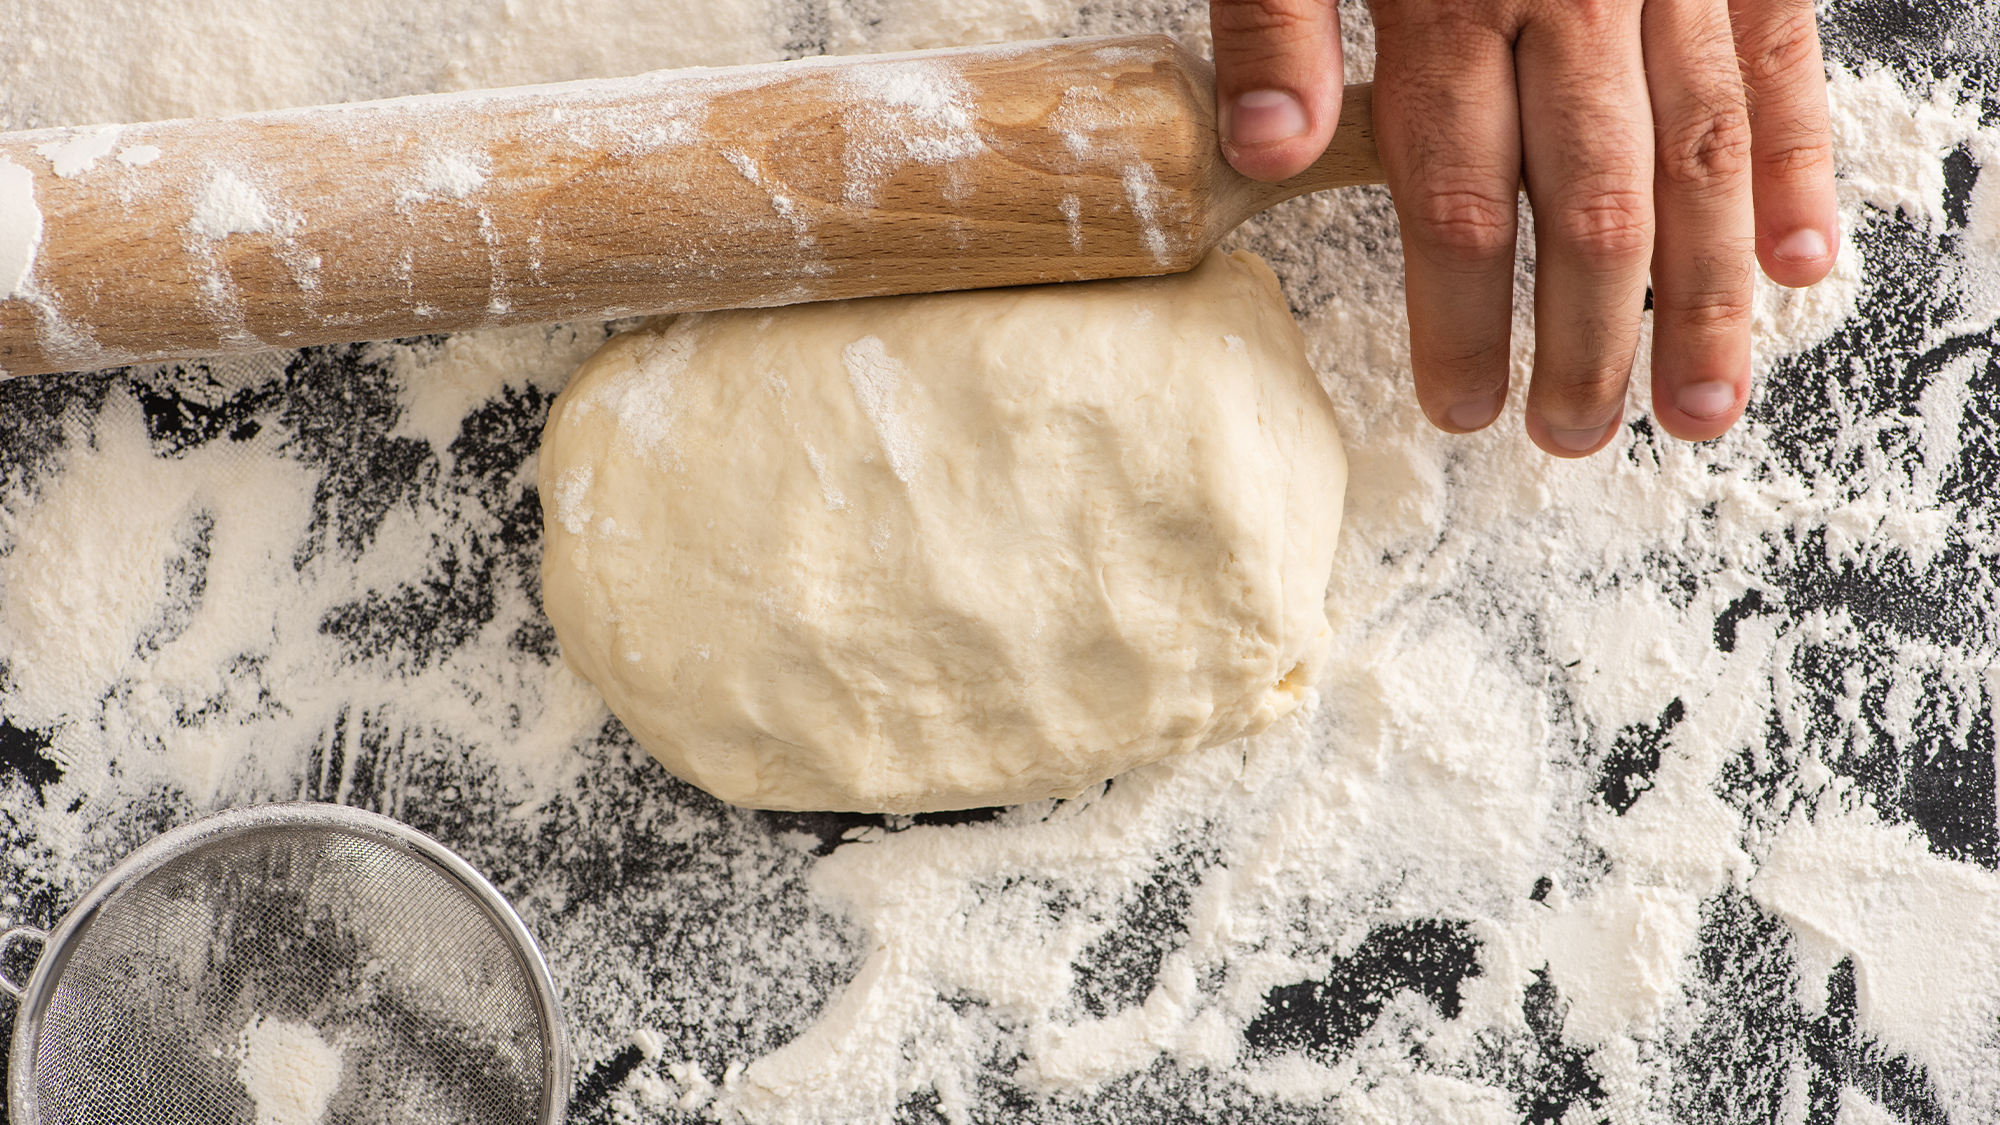 Dough being rolled out with flour sprinkled around it.